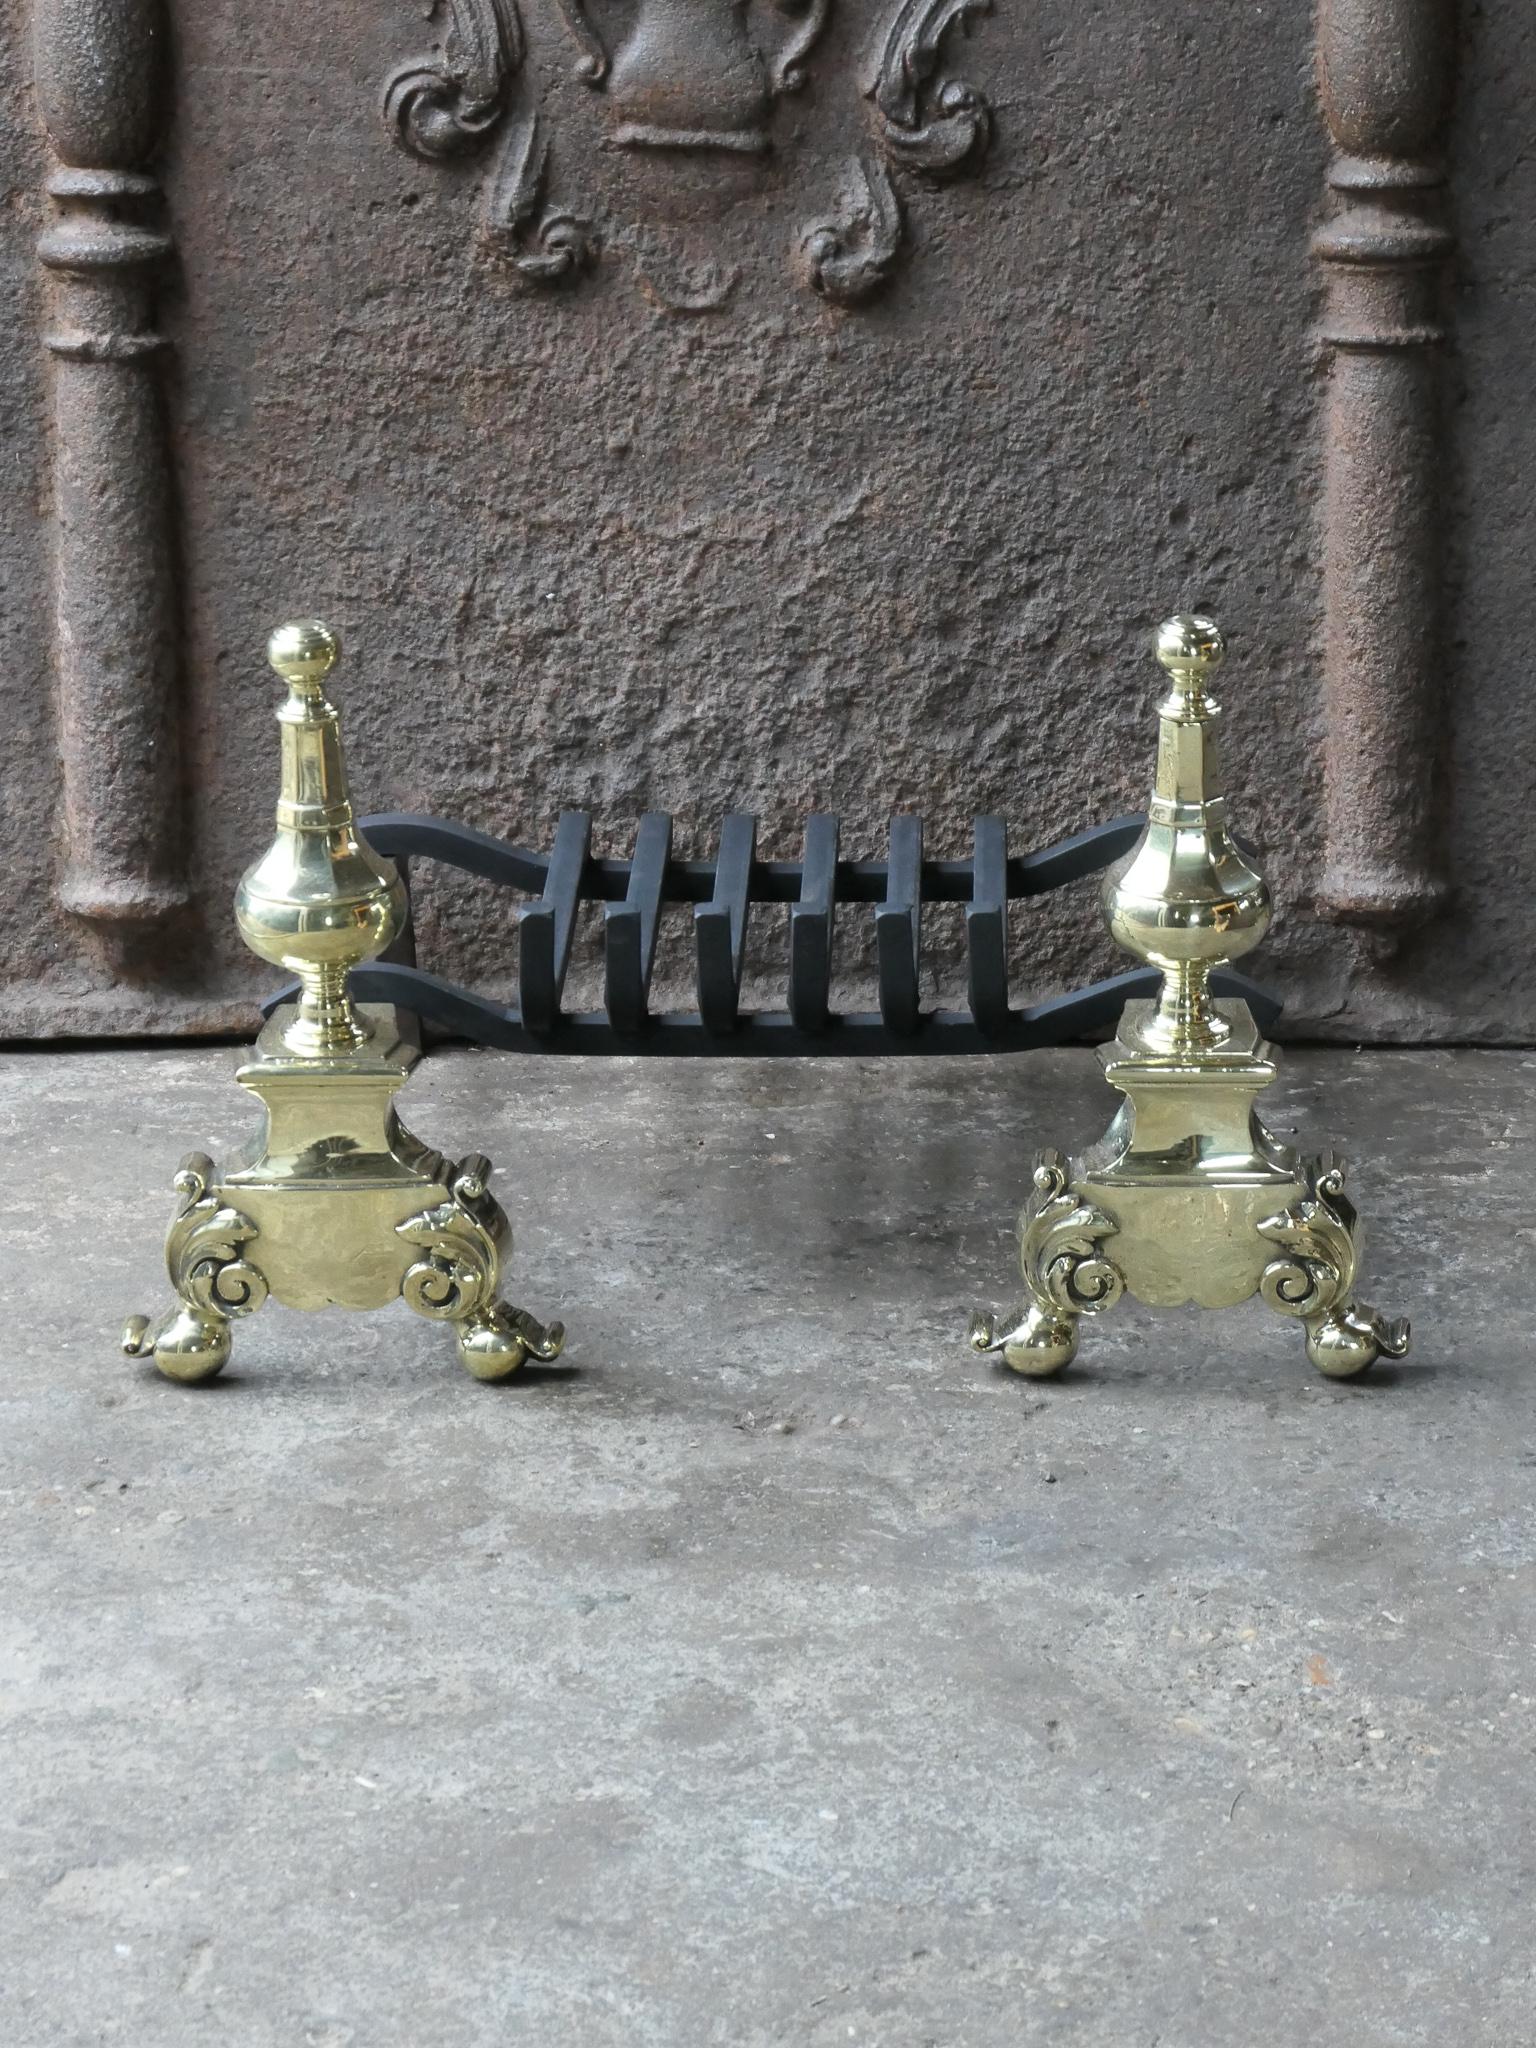 French 18th century fireplace basket or fire grate from the Louis XV period. The fireplace grate is made of wrought iron and polished brass. The condition is good.



















